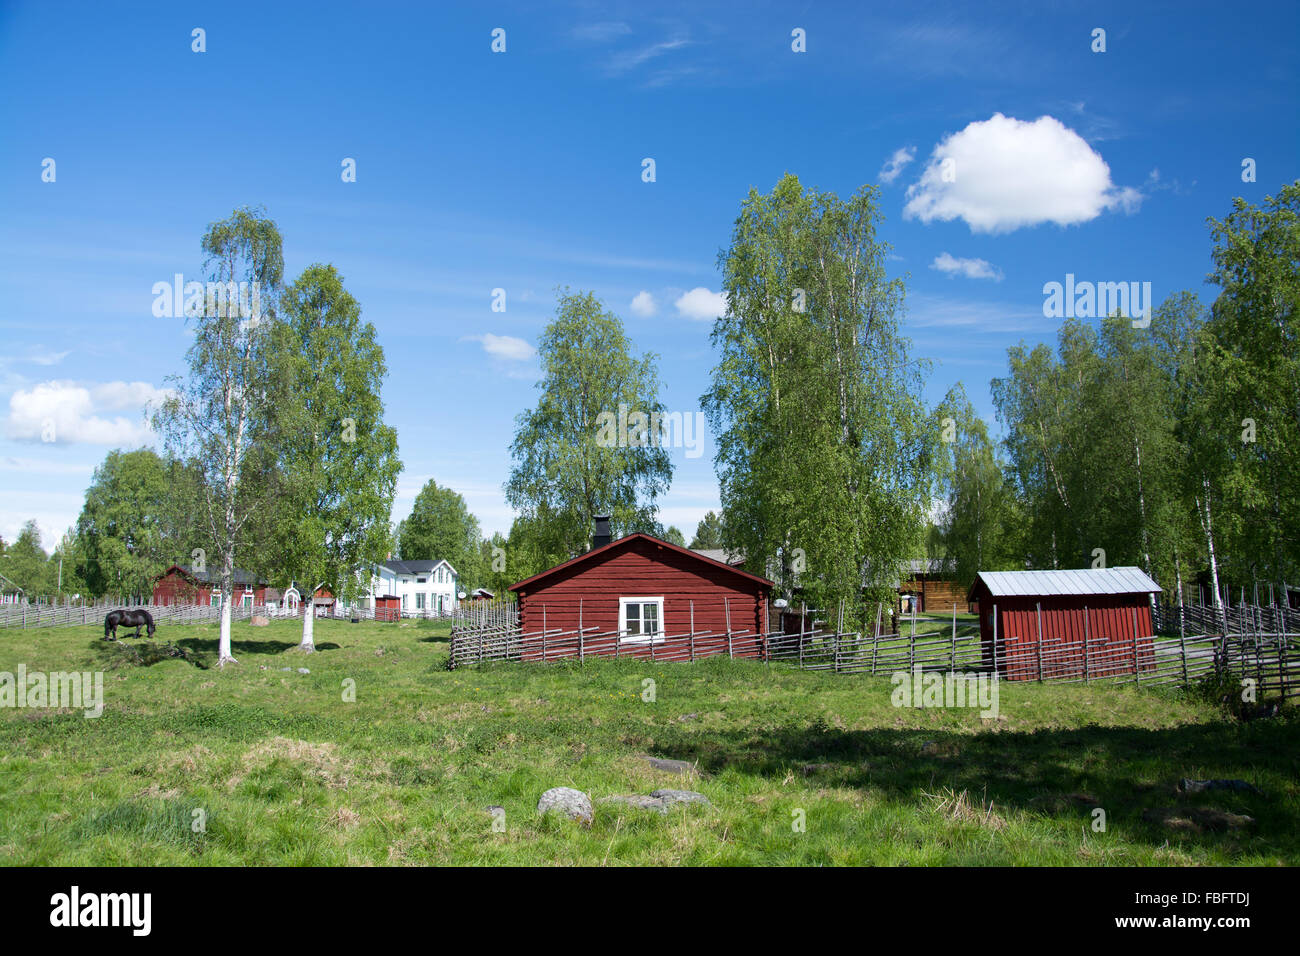 Gammelstaden or Gammelstad is a locality situated in Lulea Municipality, Norrbotten County, Sweden and known for the Gammelstad  Stock Photo